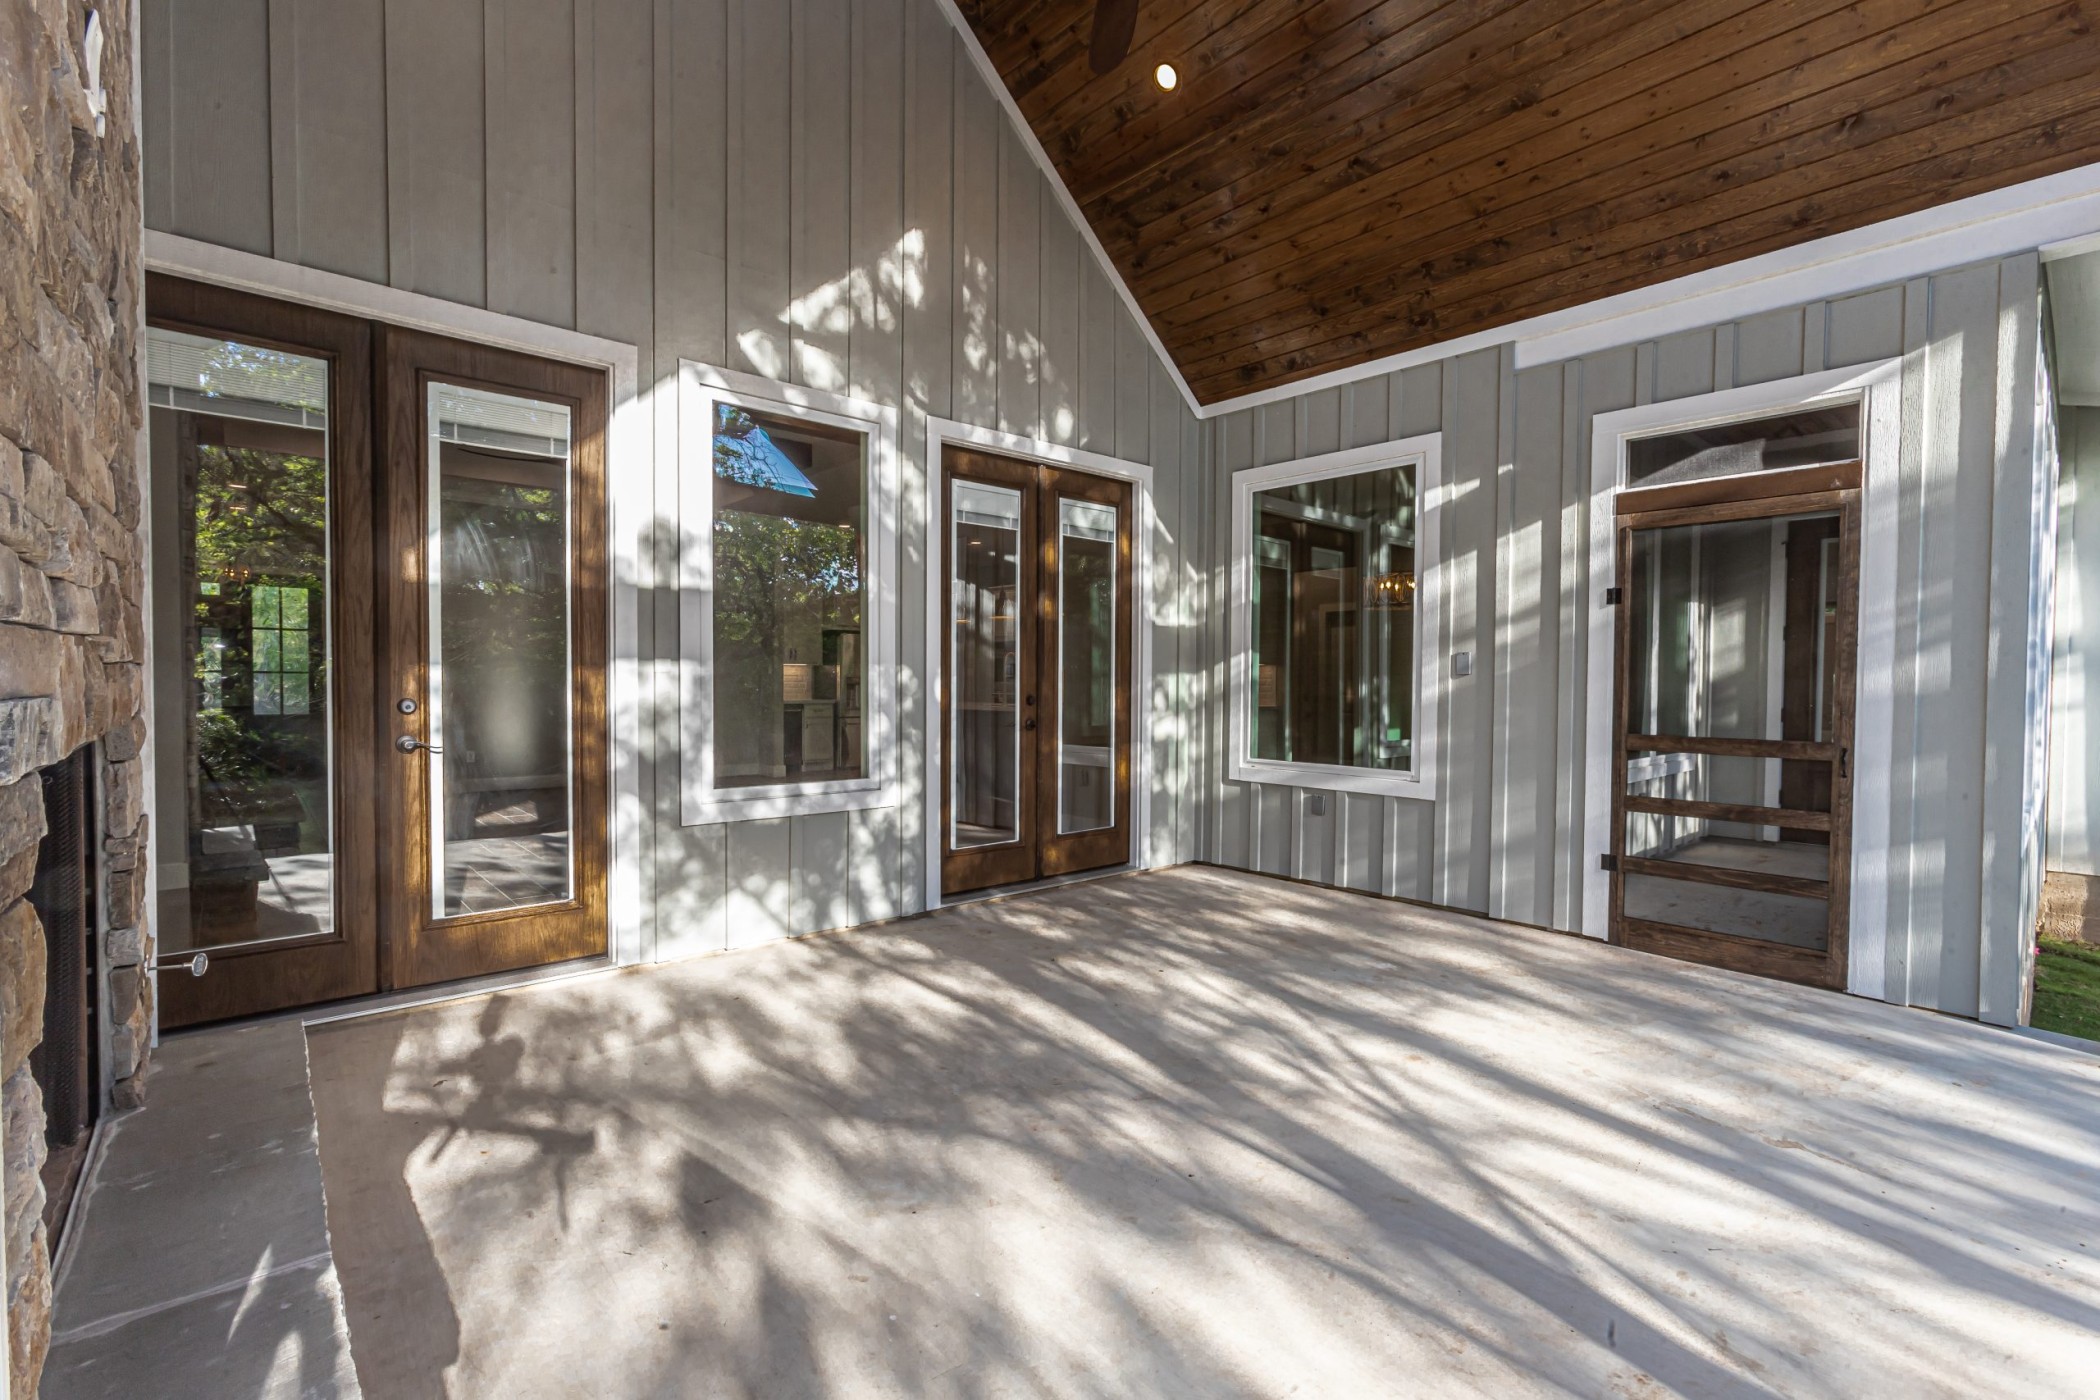 Stunning image of many French doors on a custom built home.